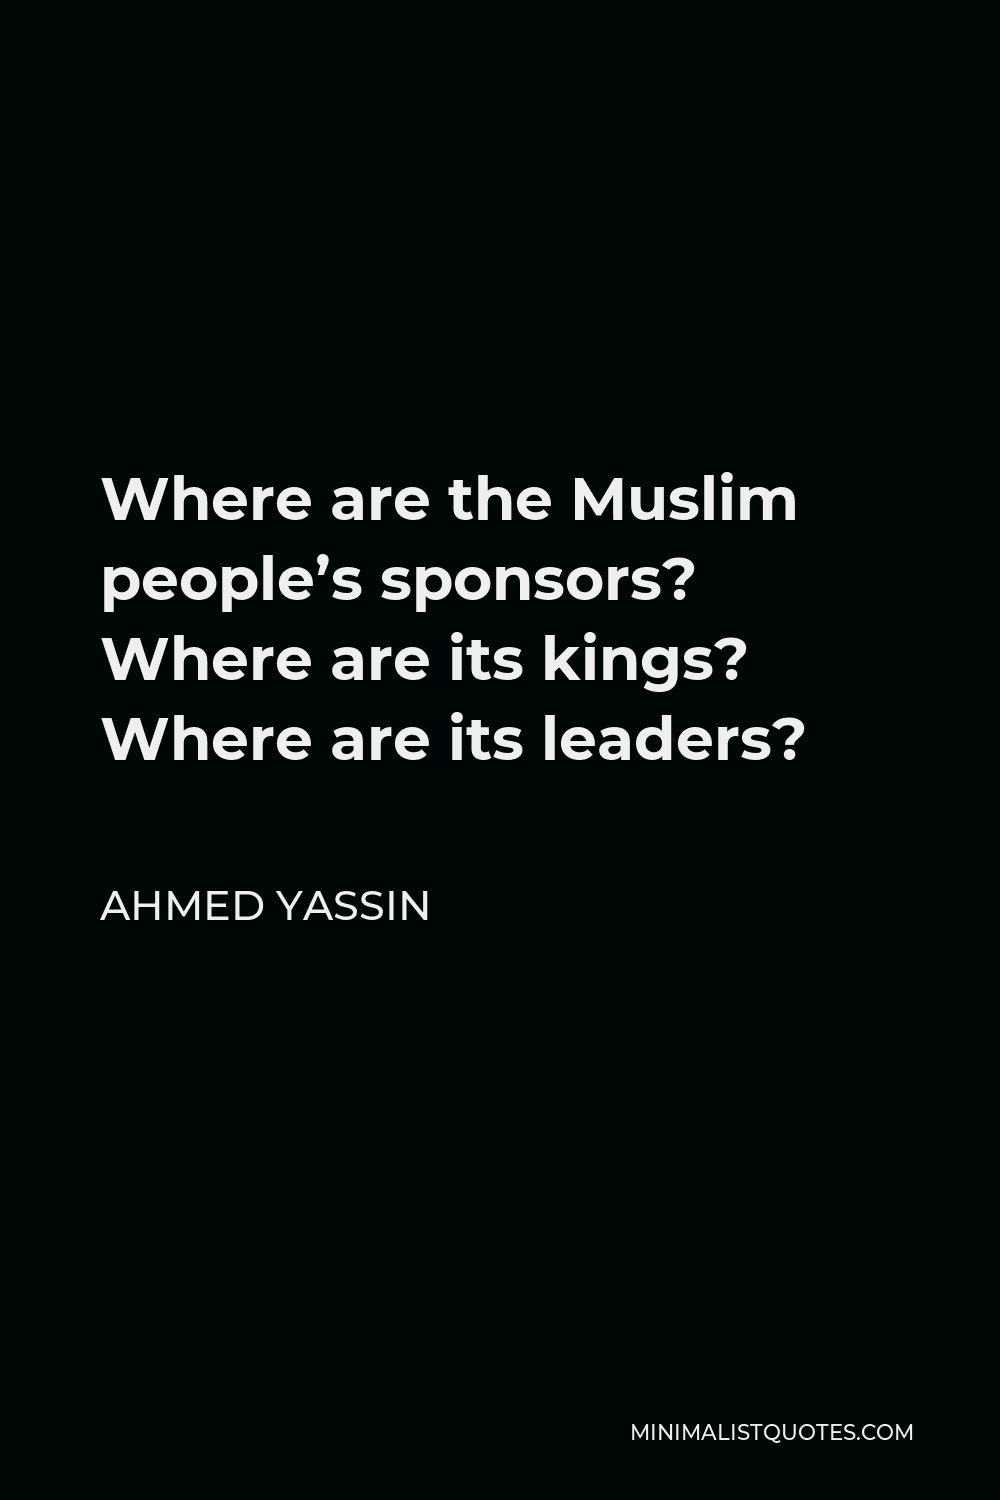 Ahmed Yassin Quote - Where are the Muslim people’s sponsors? Where are its kings? Where are its leaders?